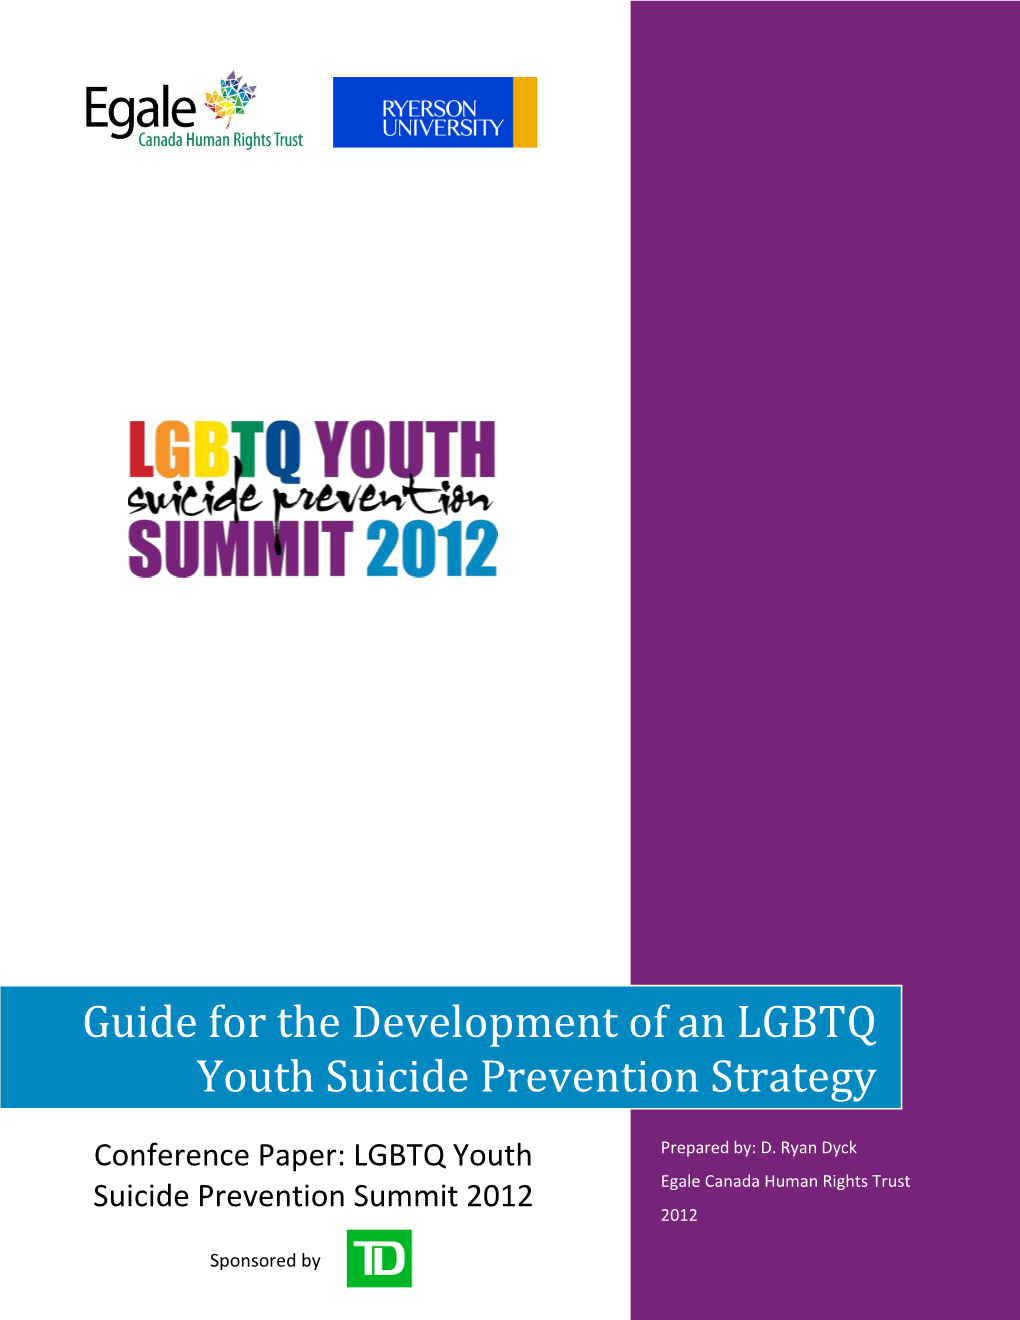 Guide for the Development of an LGBTQ Youth Suicide Prevention Strategy